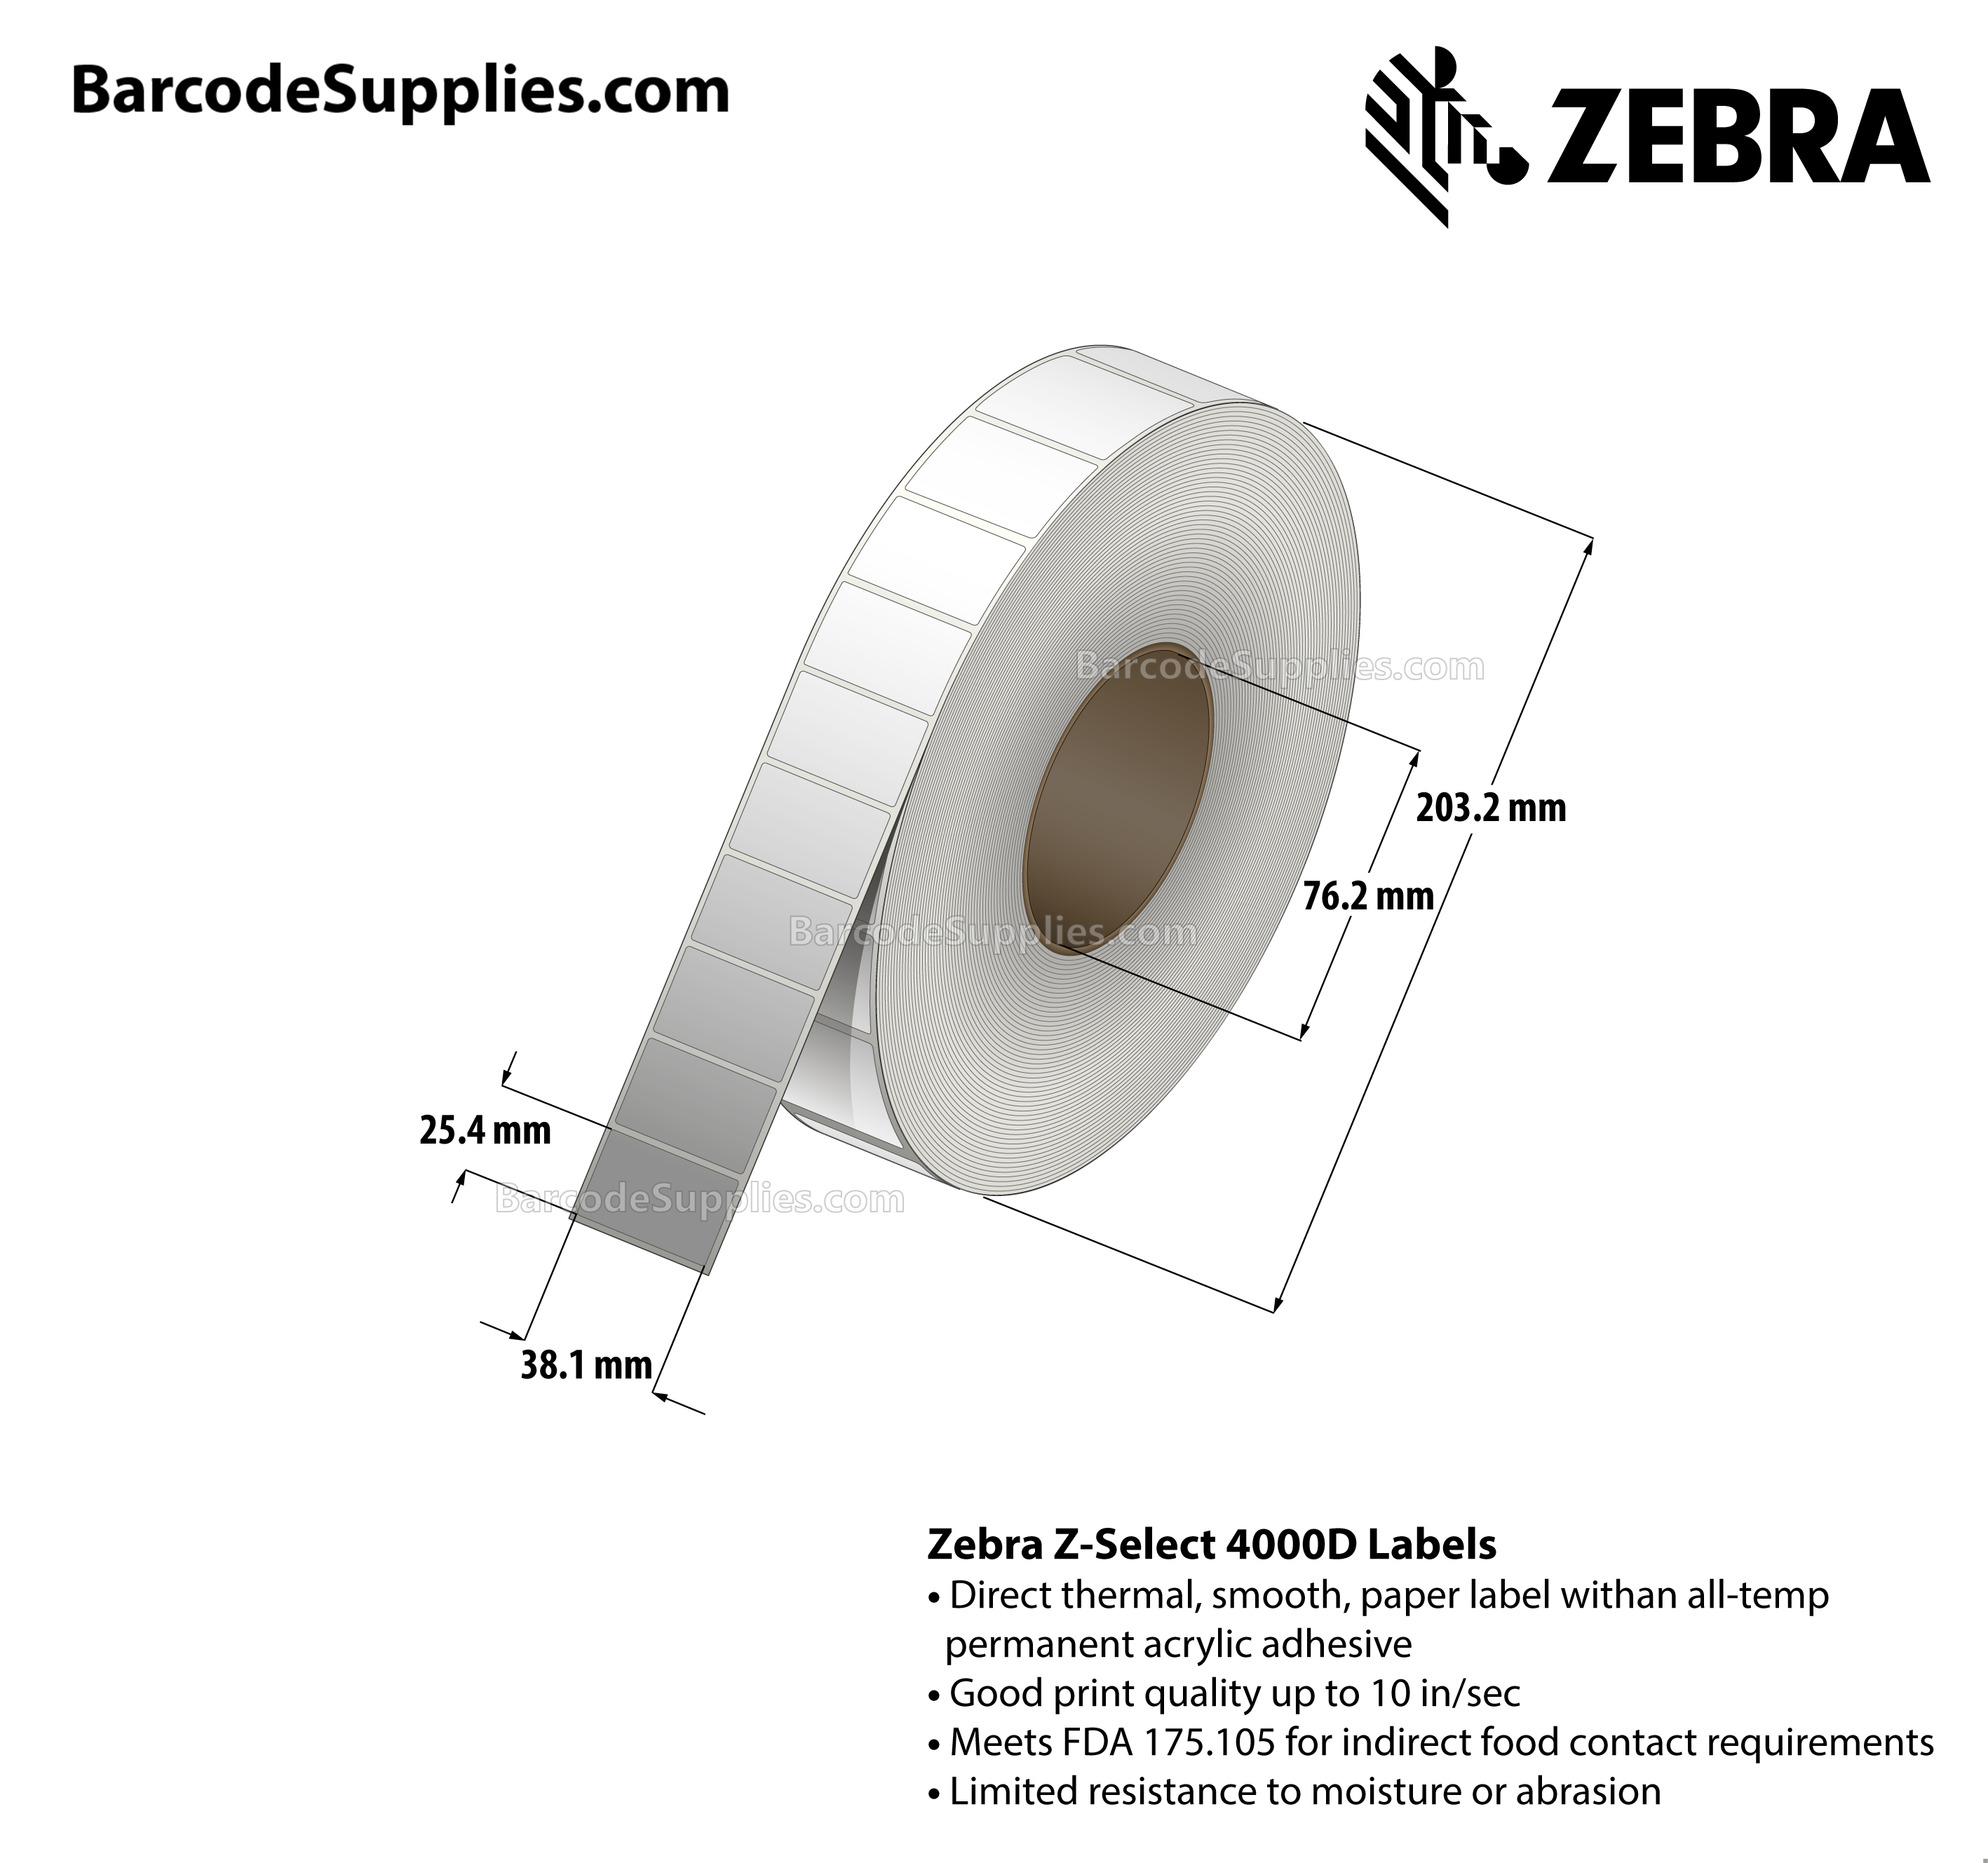 1.5 x 1 Direct Thermal White Z-Select 4000D Labels With All-Temp Adhesive - No Perforation - 5120 Labels Per Roll - Carton Of 14 Rolls - 71680 Labels Total - MPN: 88686